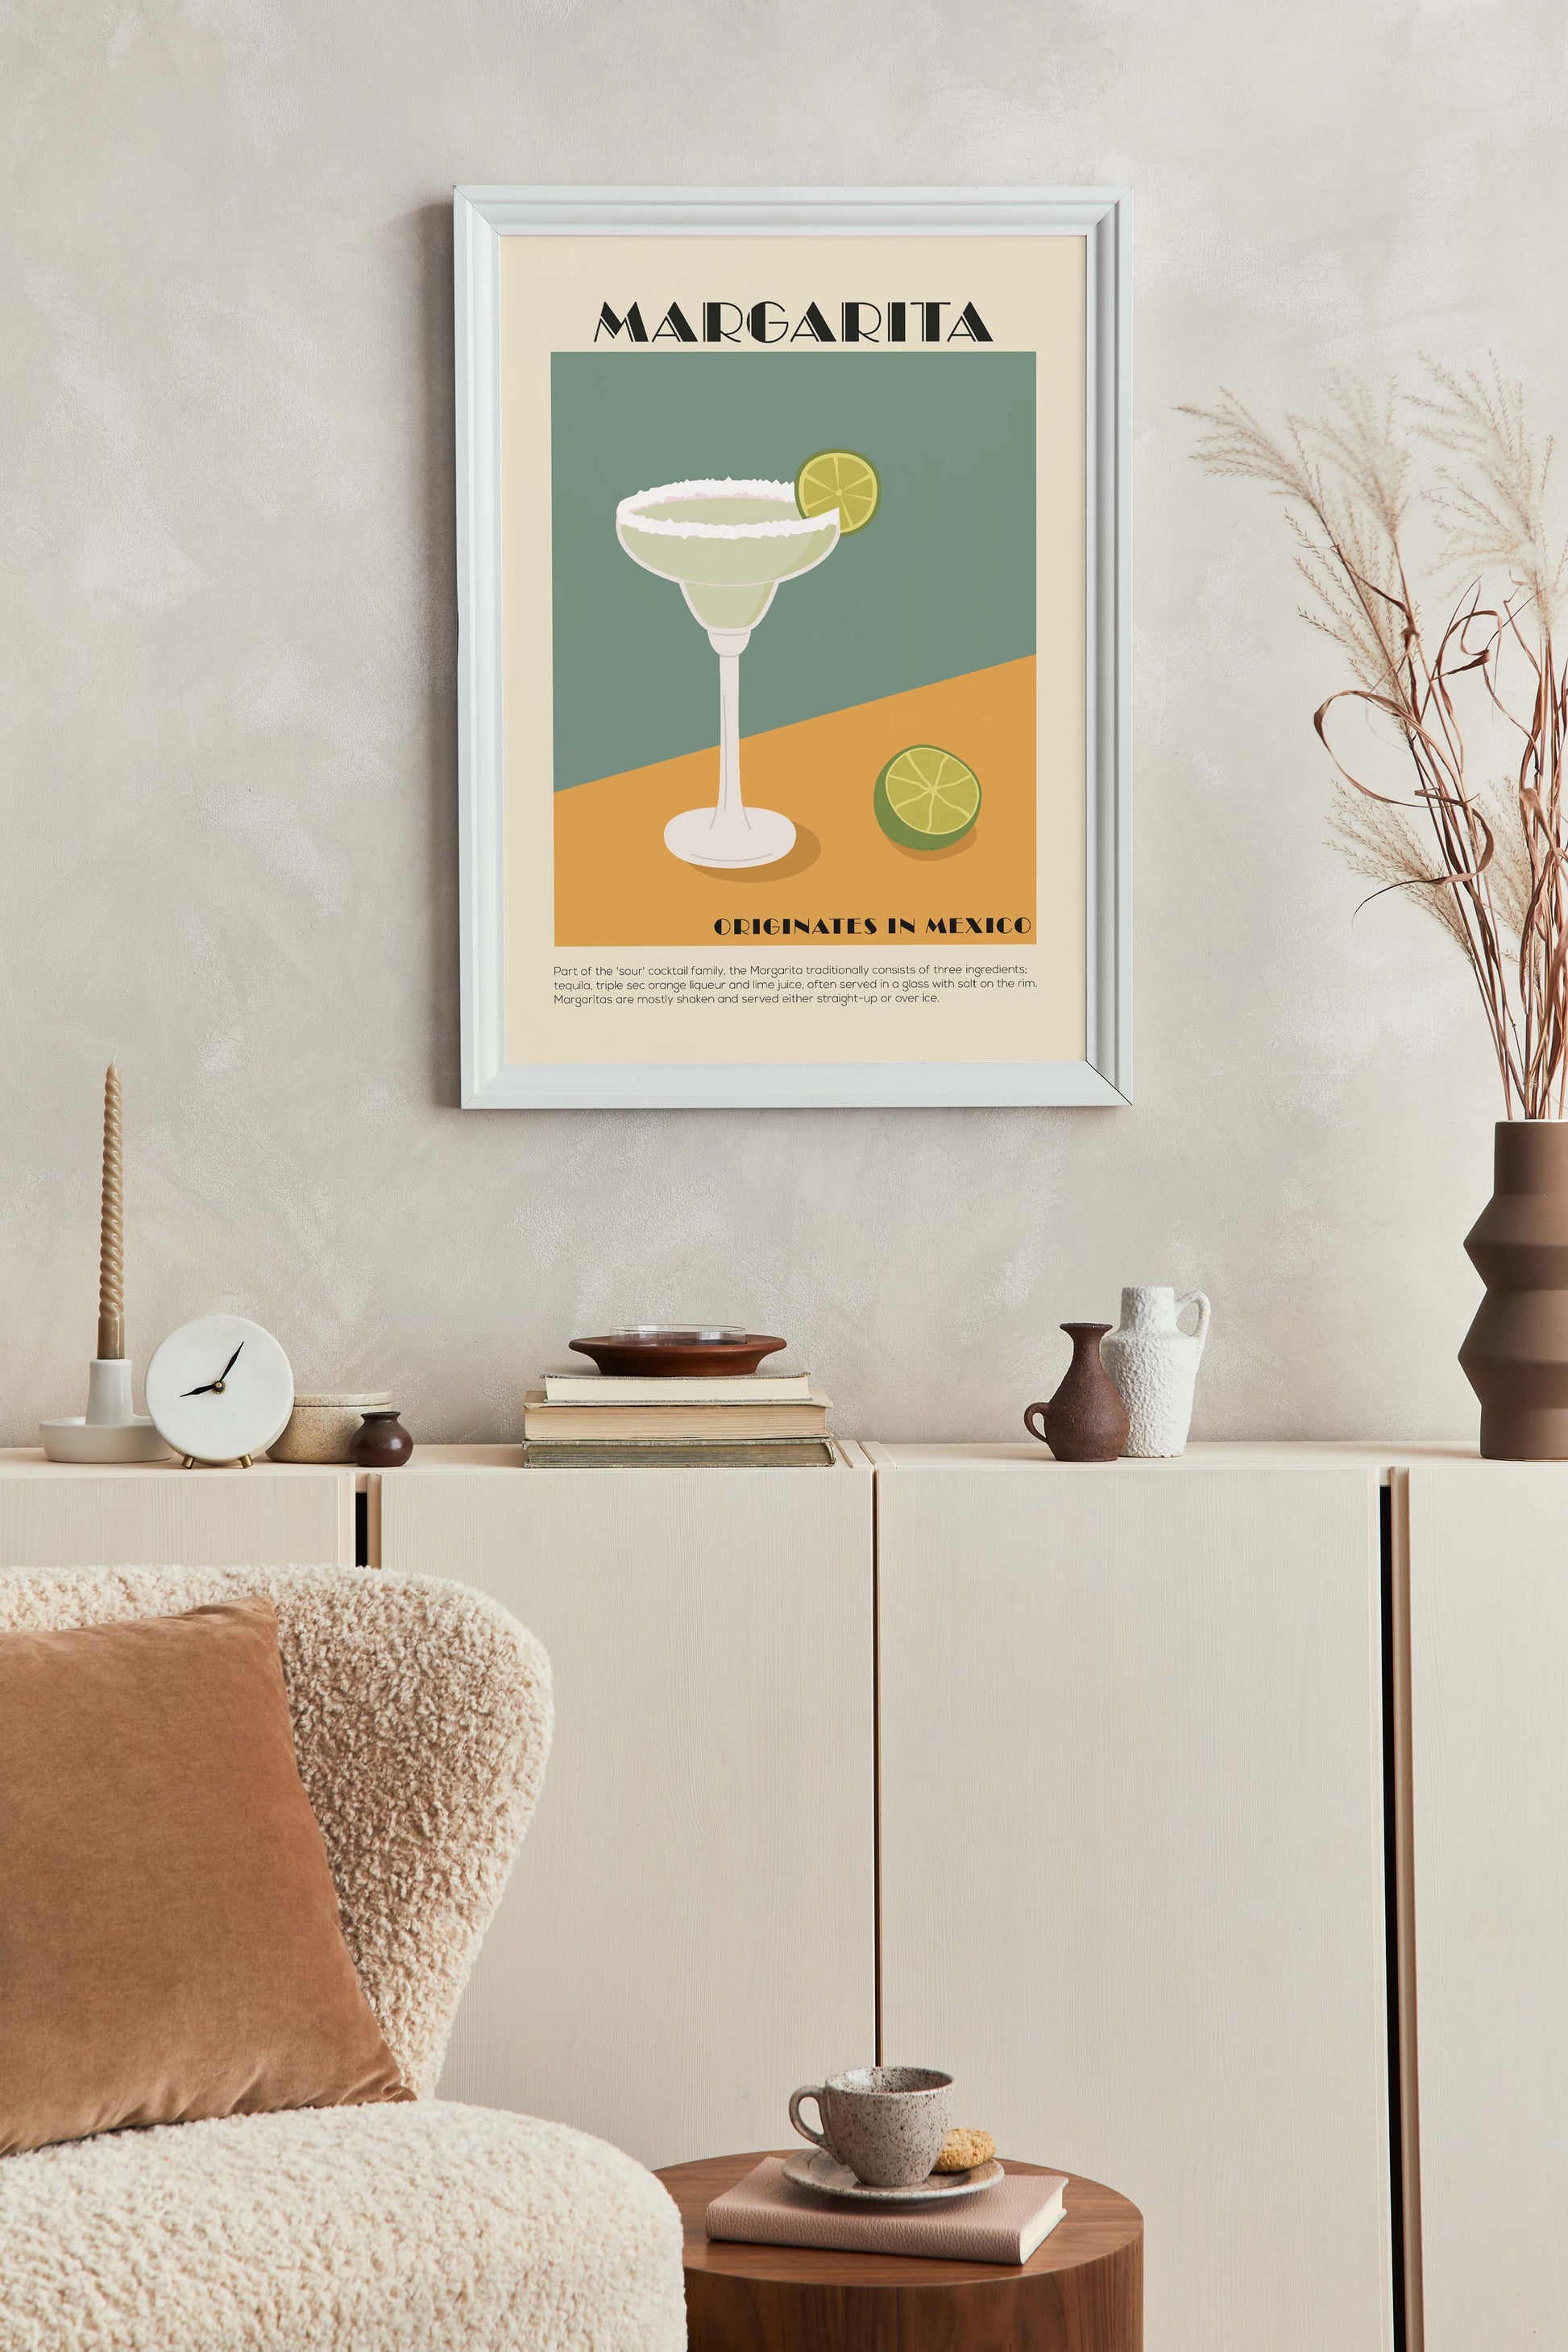 Minimalist margarita cocktail poster in an art deco style